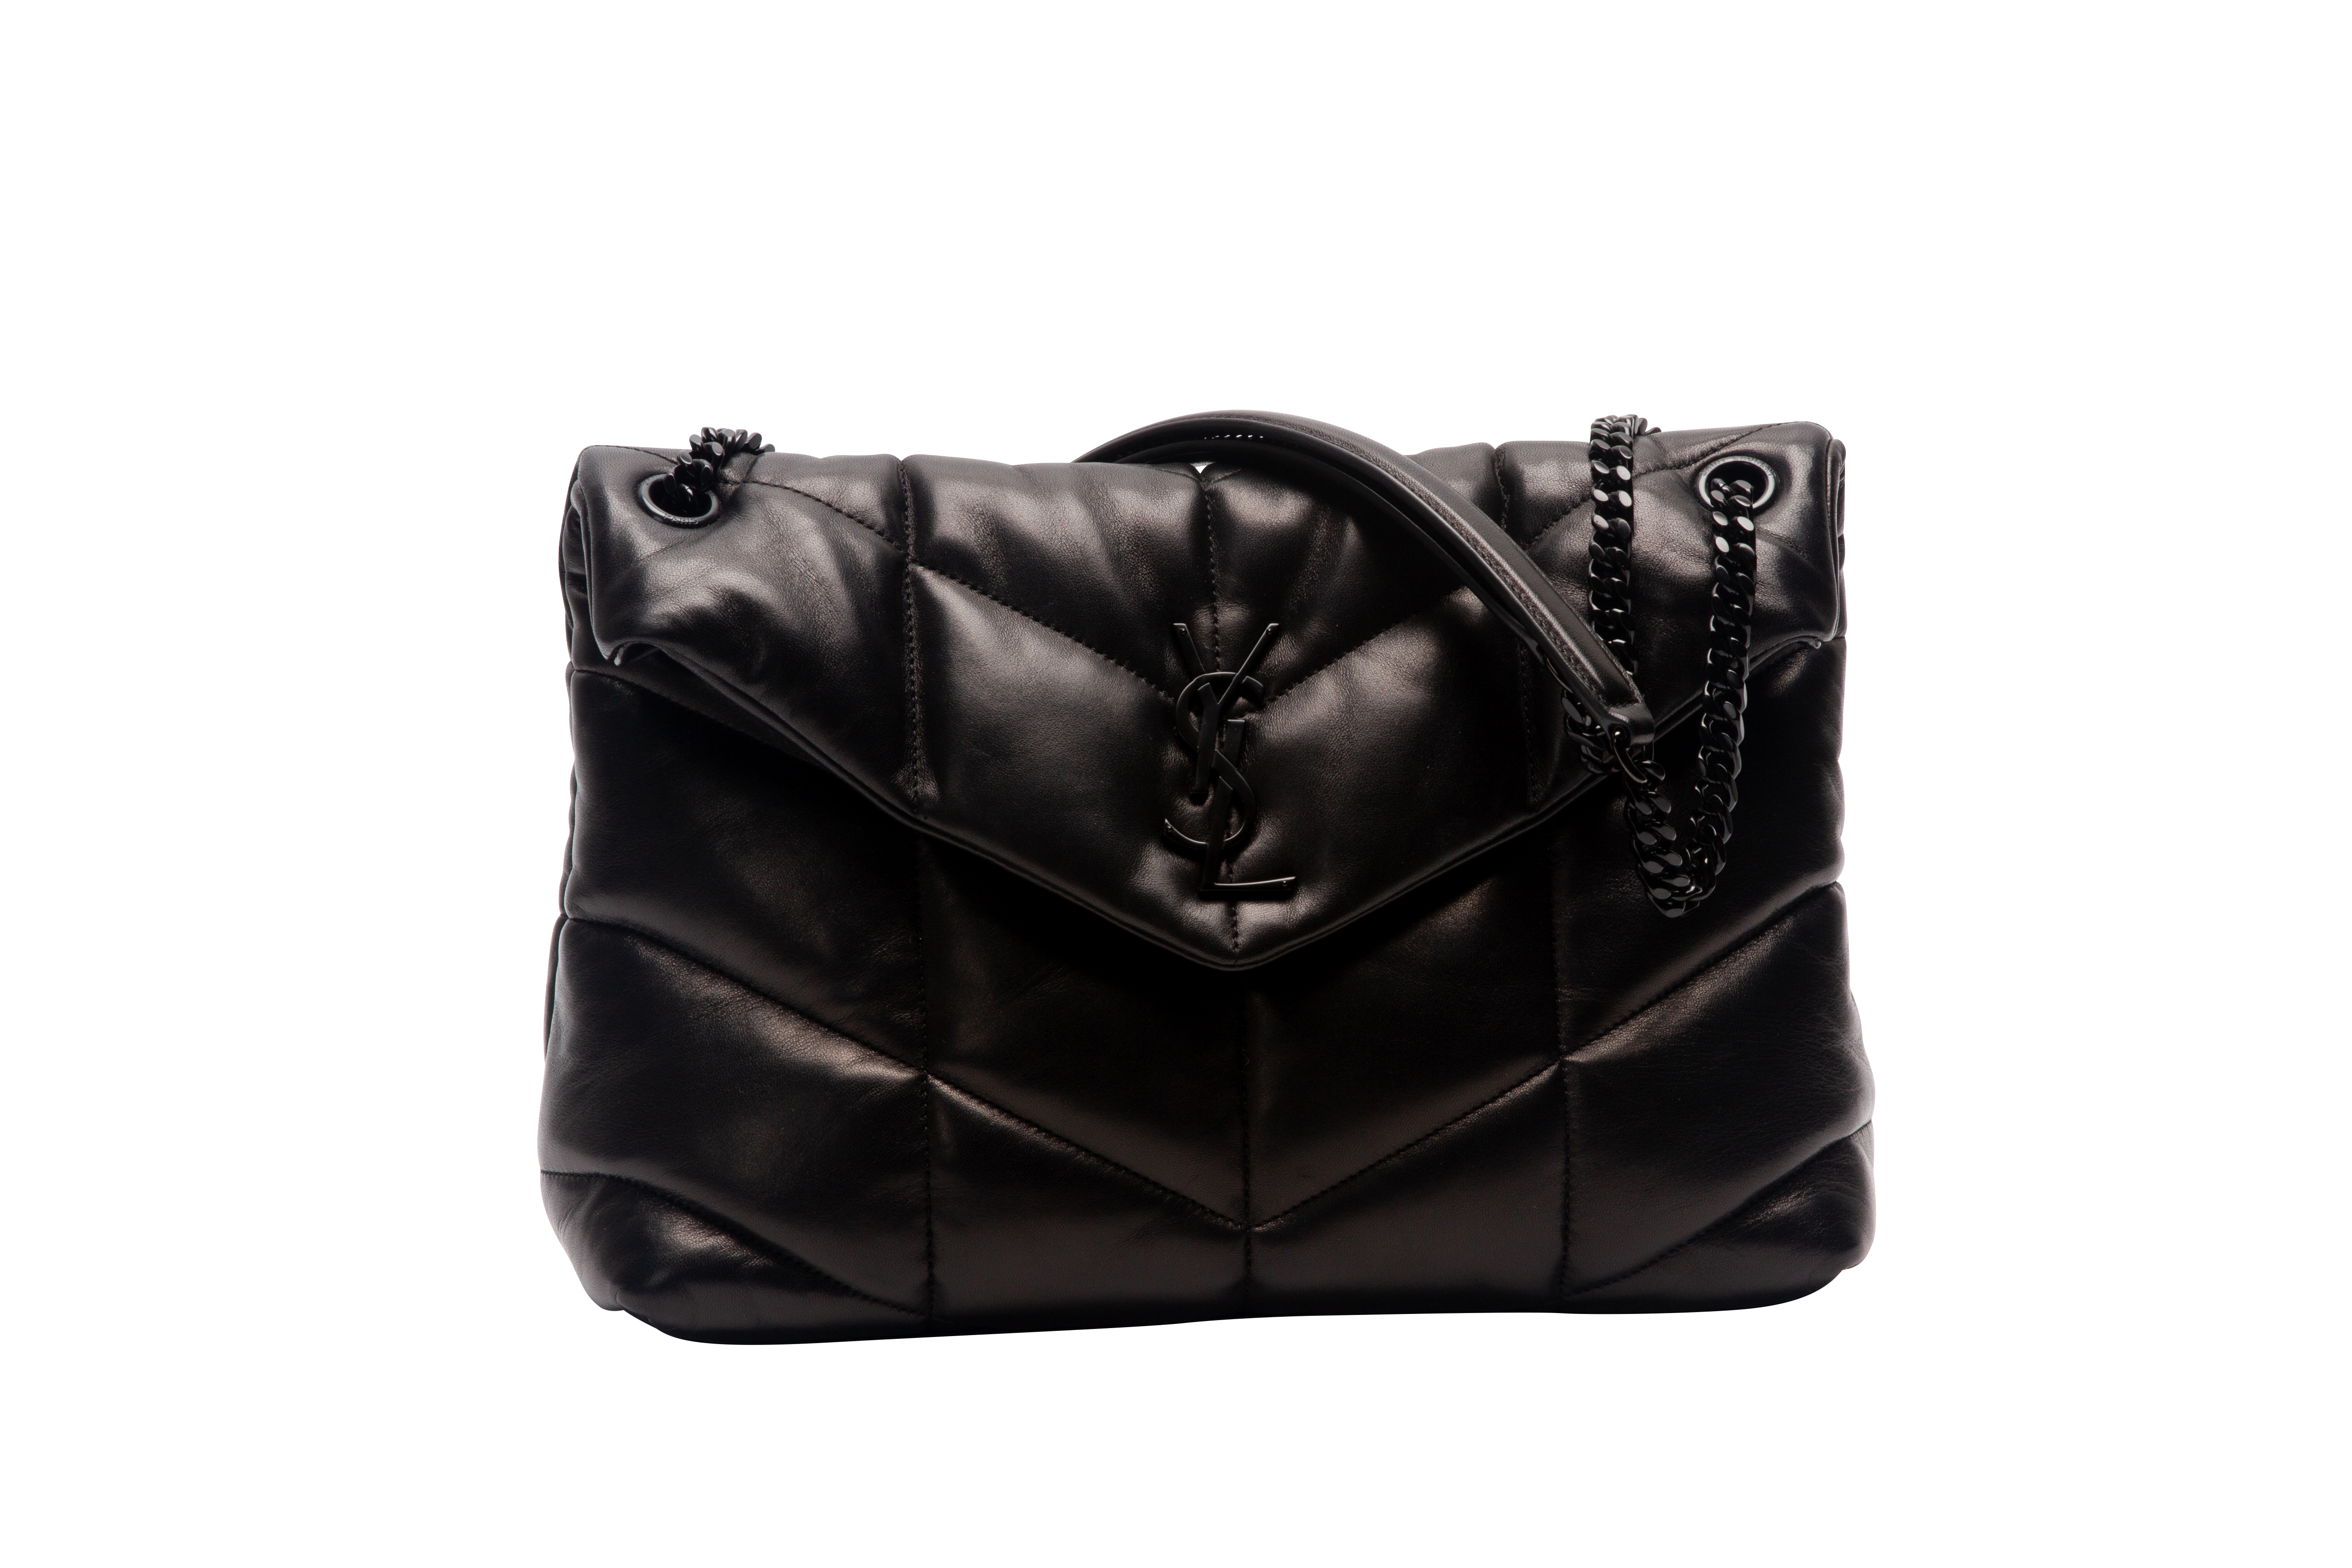 AN YVES SAINT LAURENT LOULOU QUILTED LEATHER SHOULDER BAG - Image 2 of 5